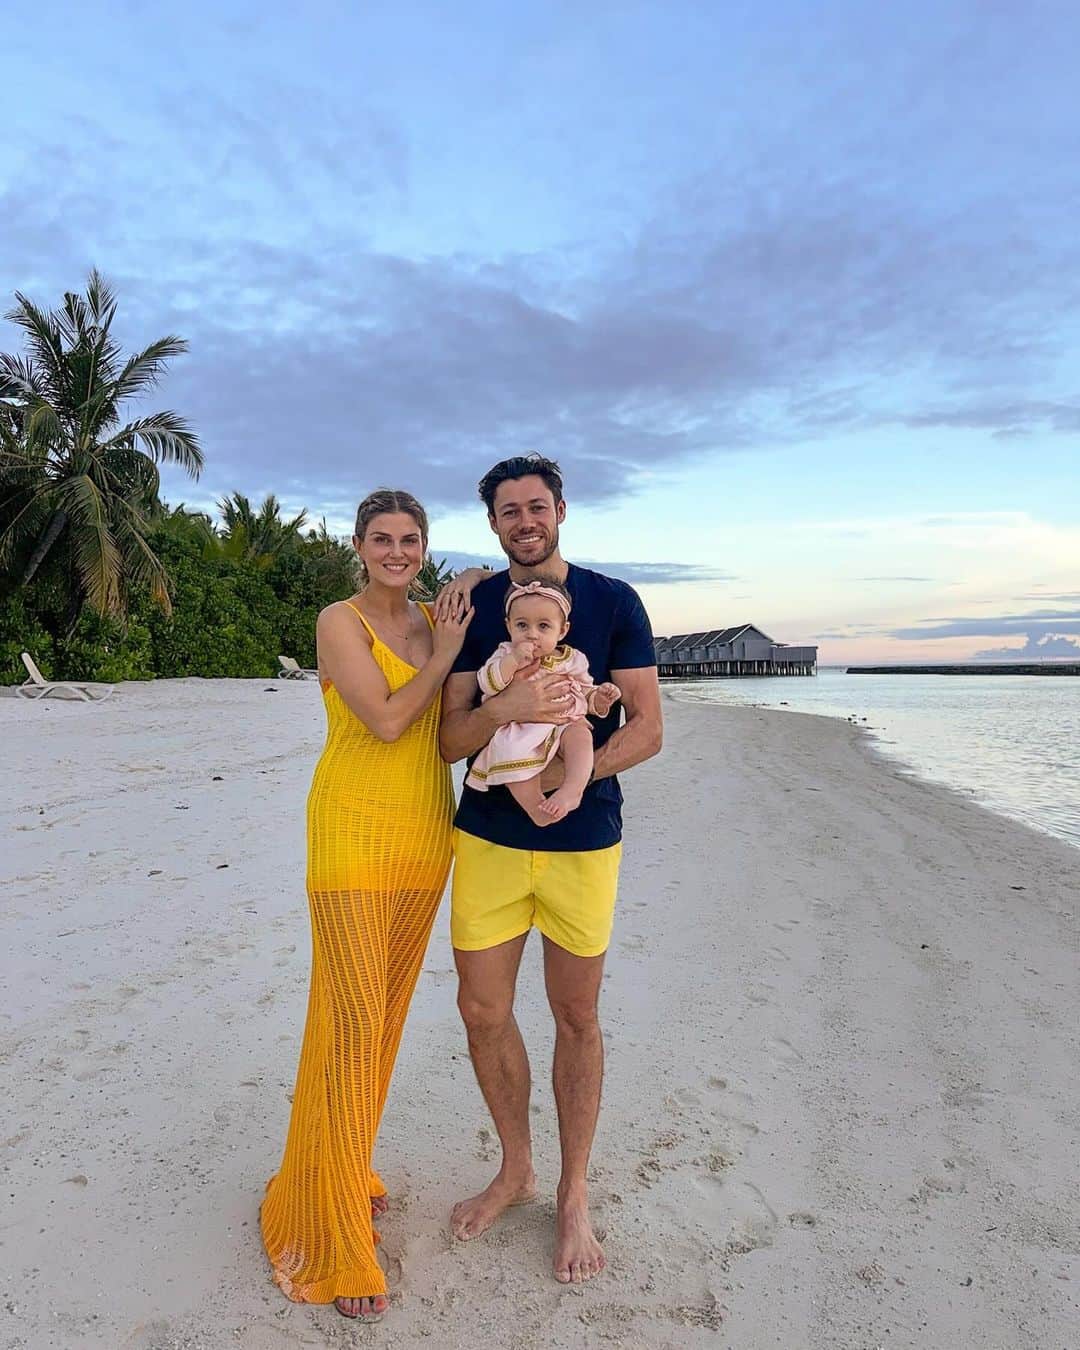 Ashley Jamesのインスタグラム：「So happy to be here in the Maldives as a family! 💕🌴 It’s like heaven here and it’s so nice to be able to switch off and spend time together.   I’m so tired because of the time difference, so I’ll give a proper update tomorrow but the kids have both adapted so well!   We’re staying at a resort called Kuramathi where it feels like living in a post card. The resort has an amazing kids club, some of the best diving in the Maldives, and those famous sunsets. 🦈 🌅 What’s so nice is it’s only a boat trip away from the main airport.  Alf didn’t want to be in these photos, but swipe to the end to see how happy he is. Ada has been a dream. She’s really come out of her shell and I can’t cope with her little holiday wardrobe. I actually bought this dress for @jasminebarcelona daughter, and I can’t believe ada is in it already!   I’m falling asleep so I’ll update properly tomorrow. But I’m so happy. 💓  Love you all! X  @kuramathiisland xx  AD - we very amazingly given a slight Press discount and we're paying for all activities including diving and kids club and upgraded to the all inclusive . ❤️🫶」